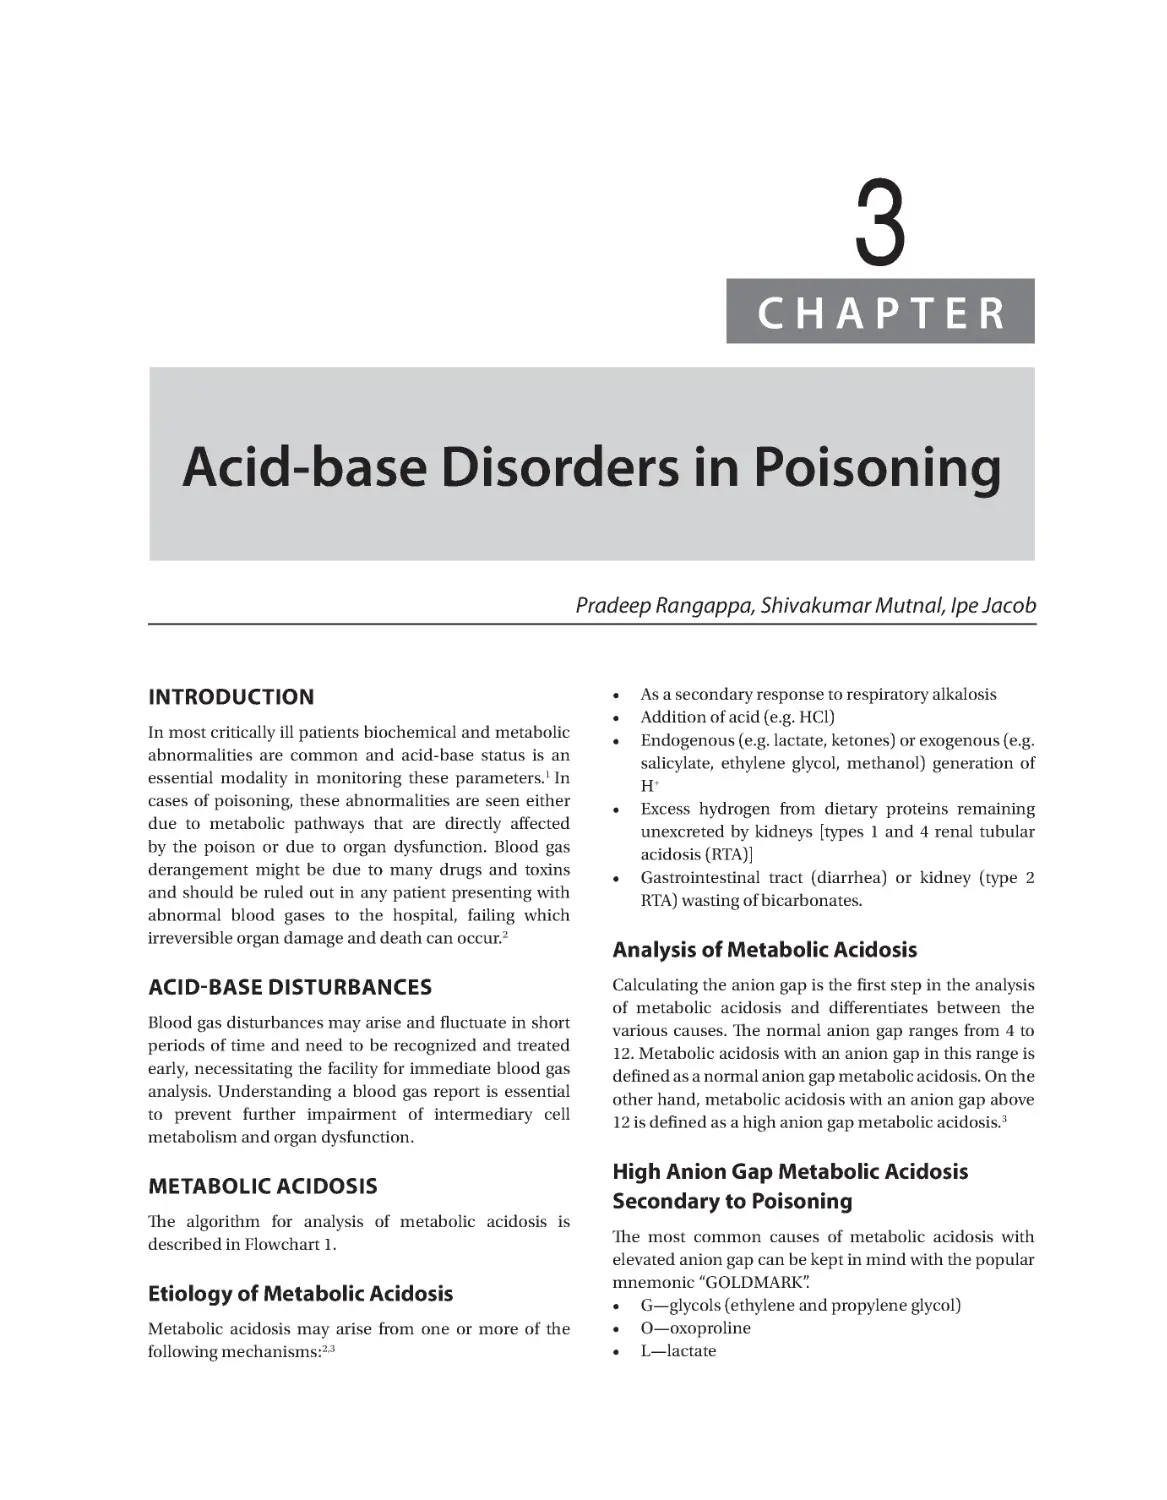 Chapter 3: Acid-base Disorders in Poisoning